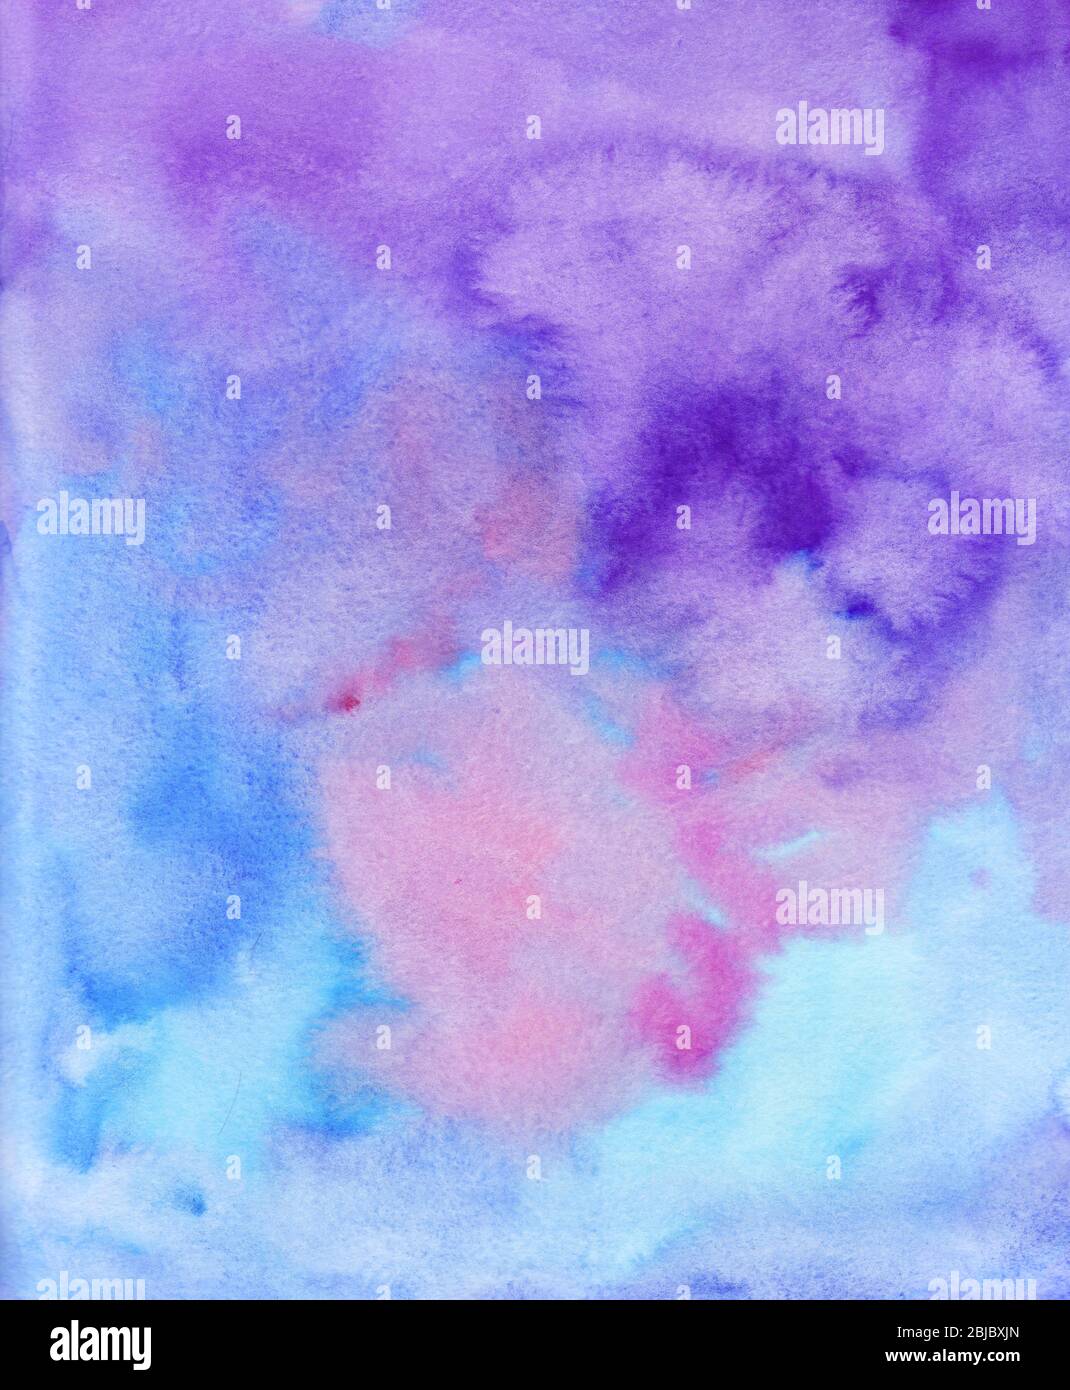 Watercolor abstract background, hand-painted texture, watercolor pink; blue, purple stains. Design for backgrounds, wallpapers, covers and packaging. Stock Photo